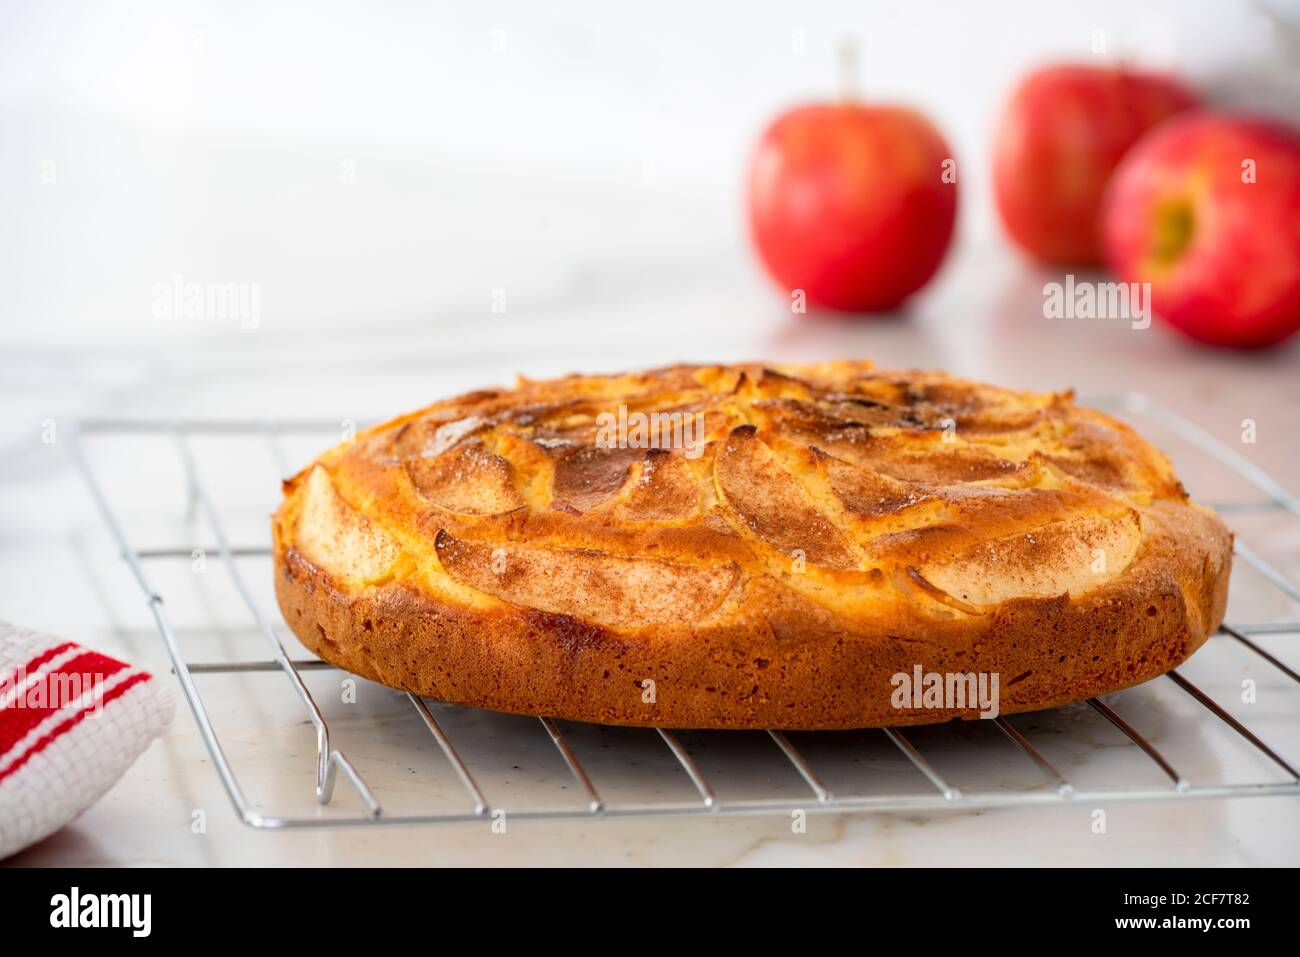 Freshly baked apple cinnamon tea cake with red apples in background Stock Photo